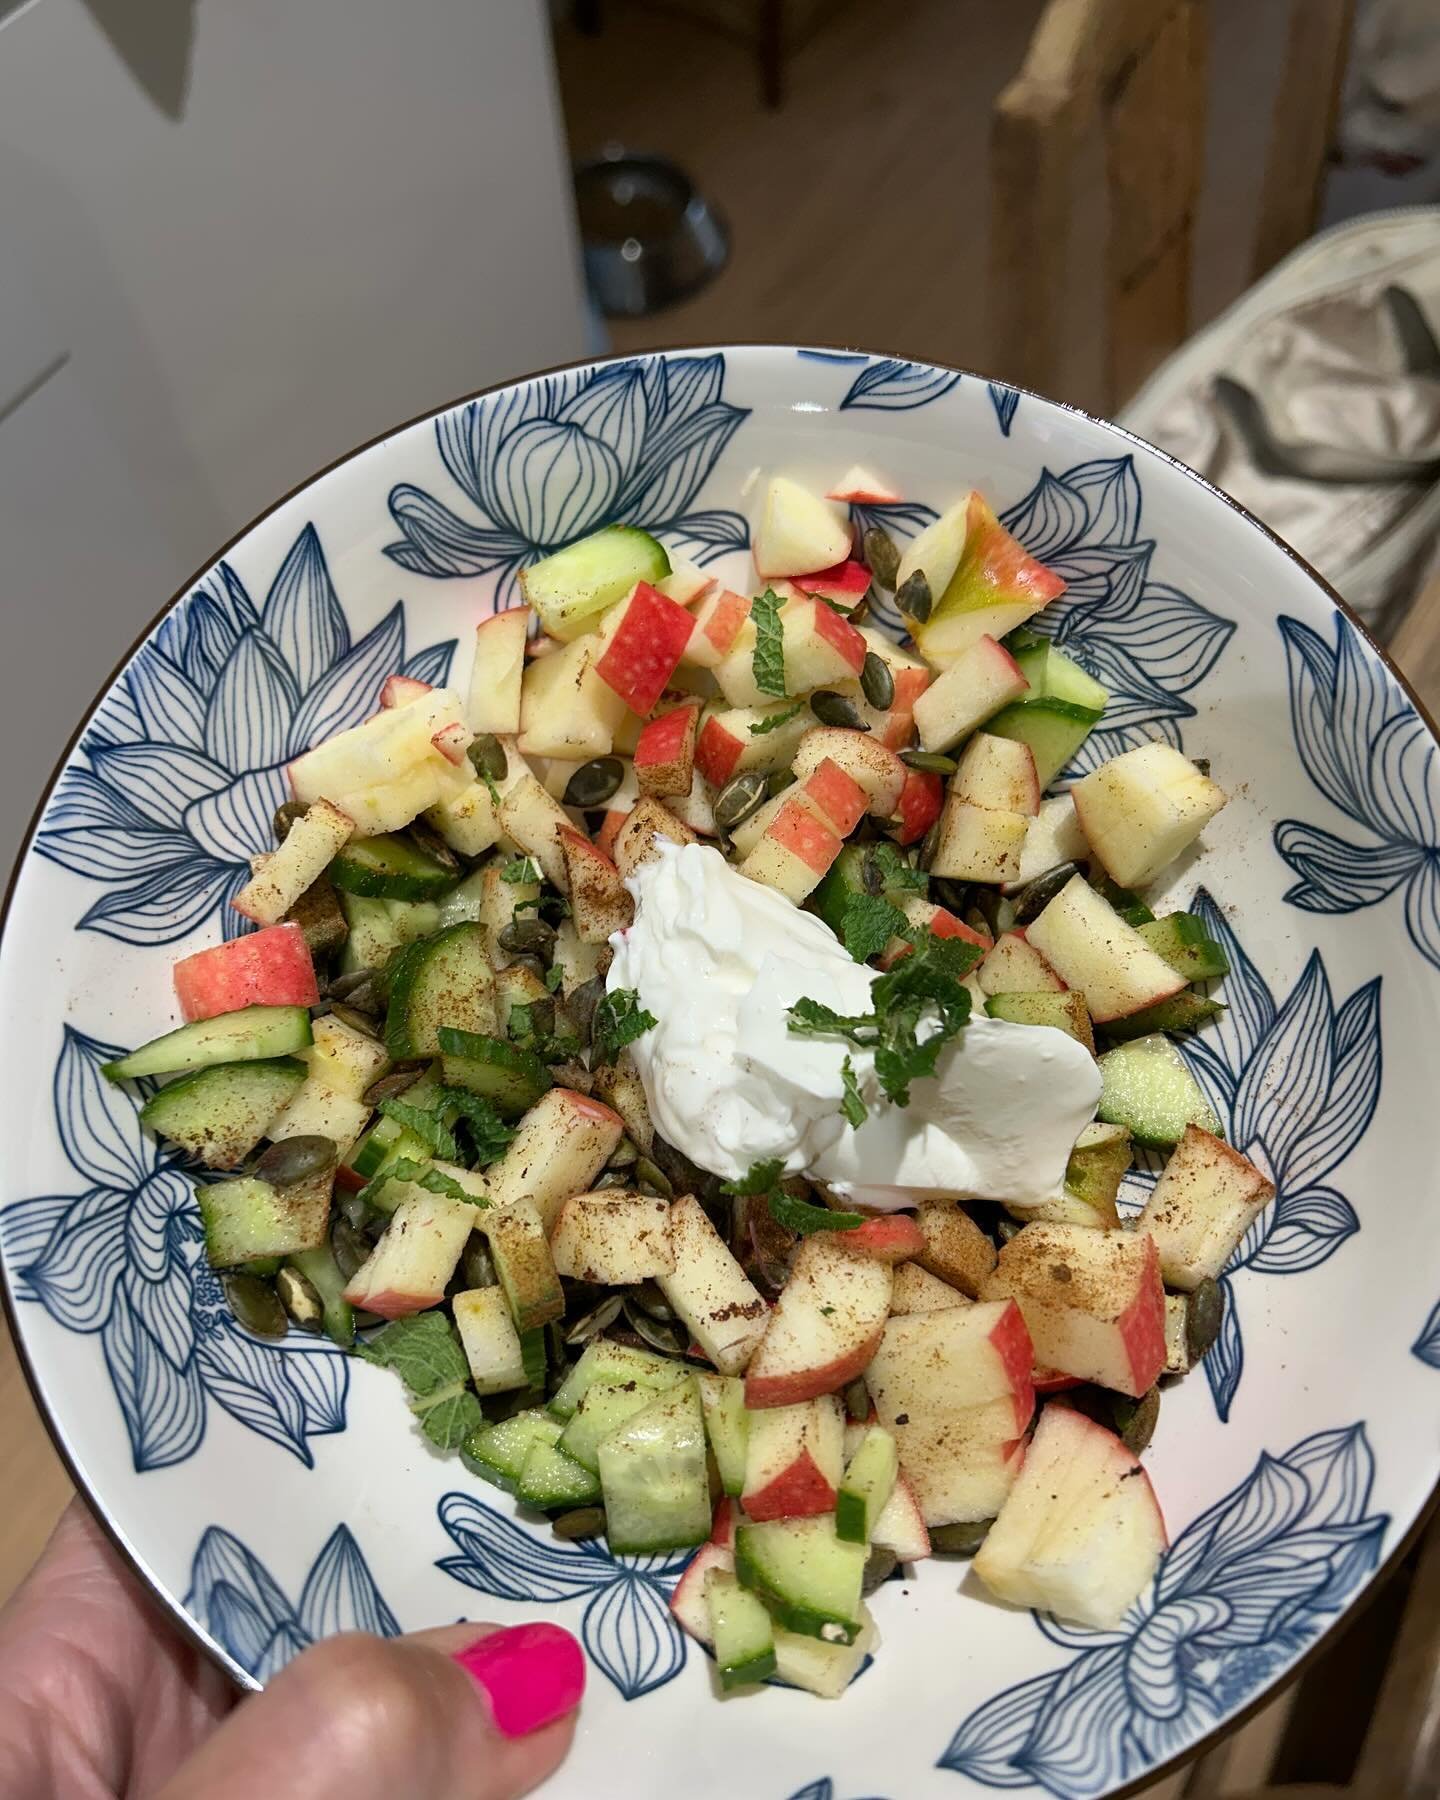 BREAKFAST:

Inspired by @losingitat50_hbd this morning. 

🔸35g of seeds (added a smidge of EVOO and cinnamon and air-fried for 3 mins)
🔸Chopped pink lady🍎
🔸Chopped cucumber and some fresh mint
🔸Dollop of Greek Yoghurt (full fat)

#phase4 #hbd #t